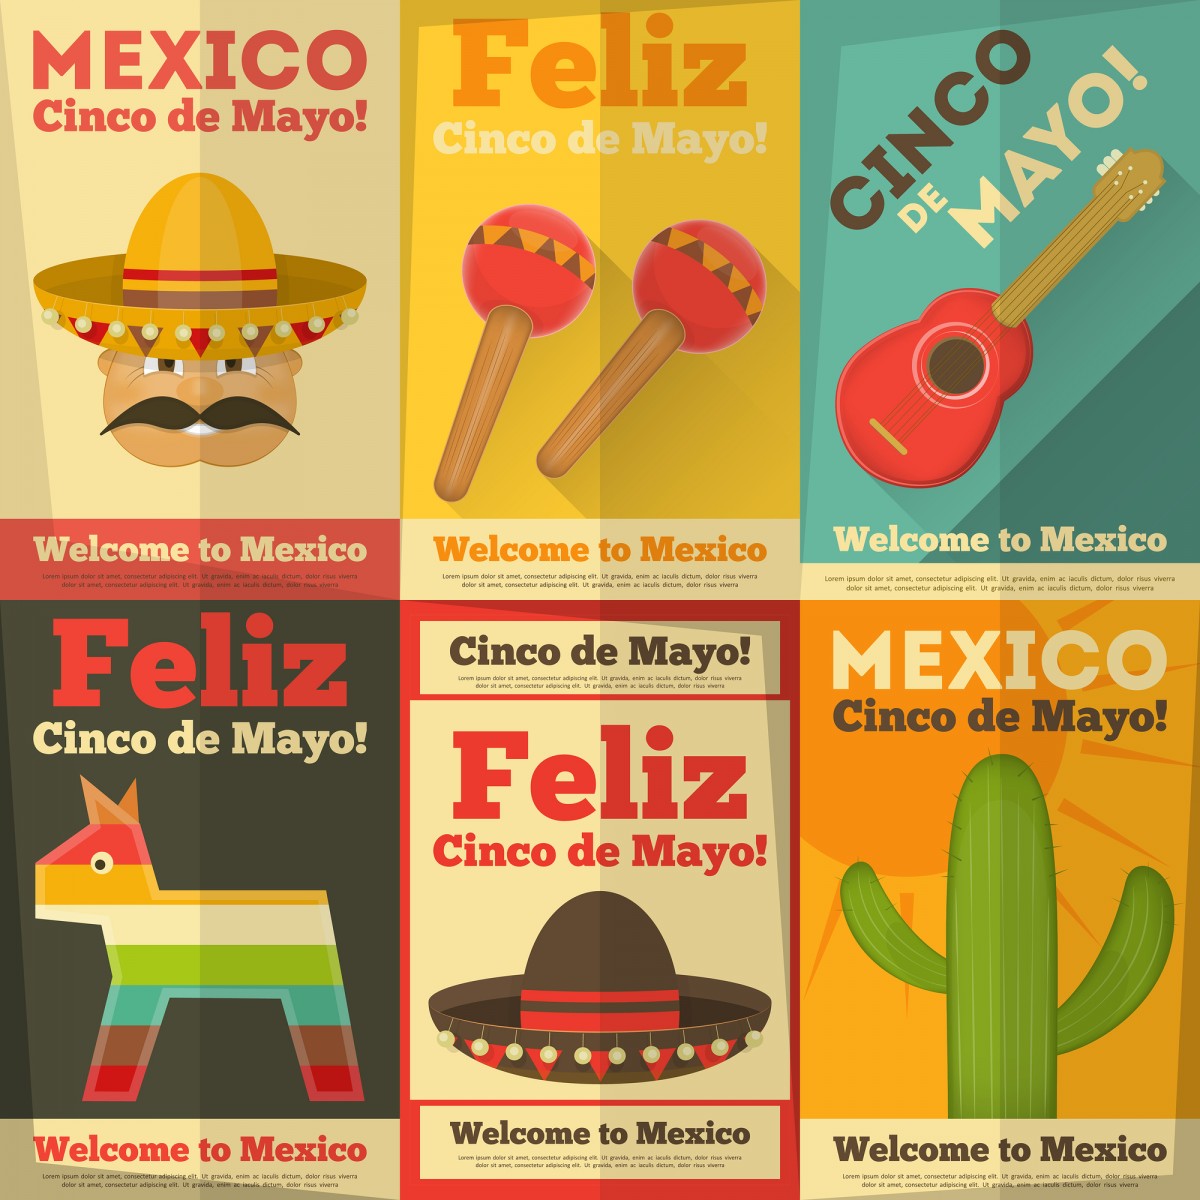 Posters for Cinco de Mayo Celebrations in Mexico